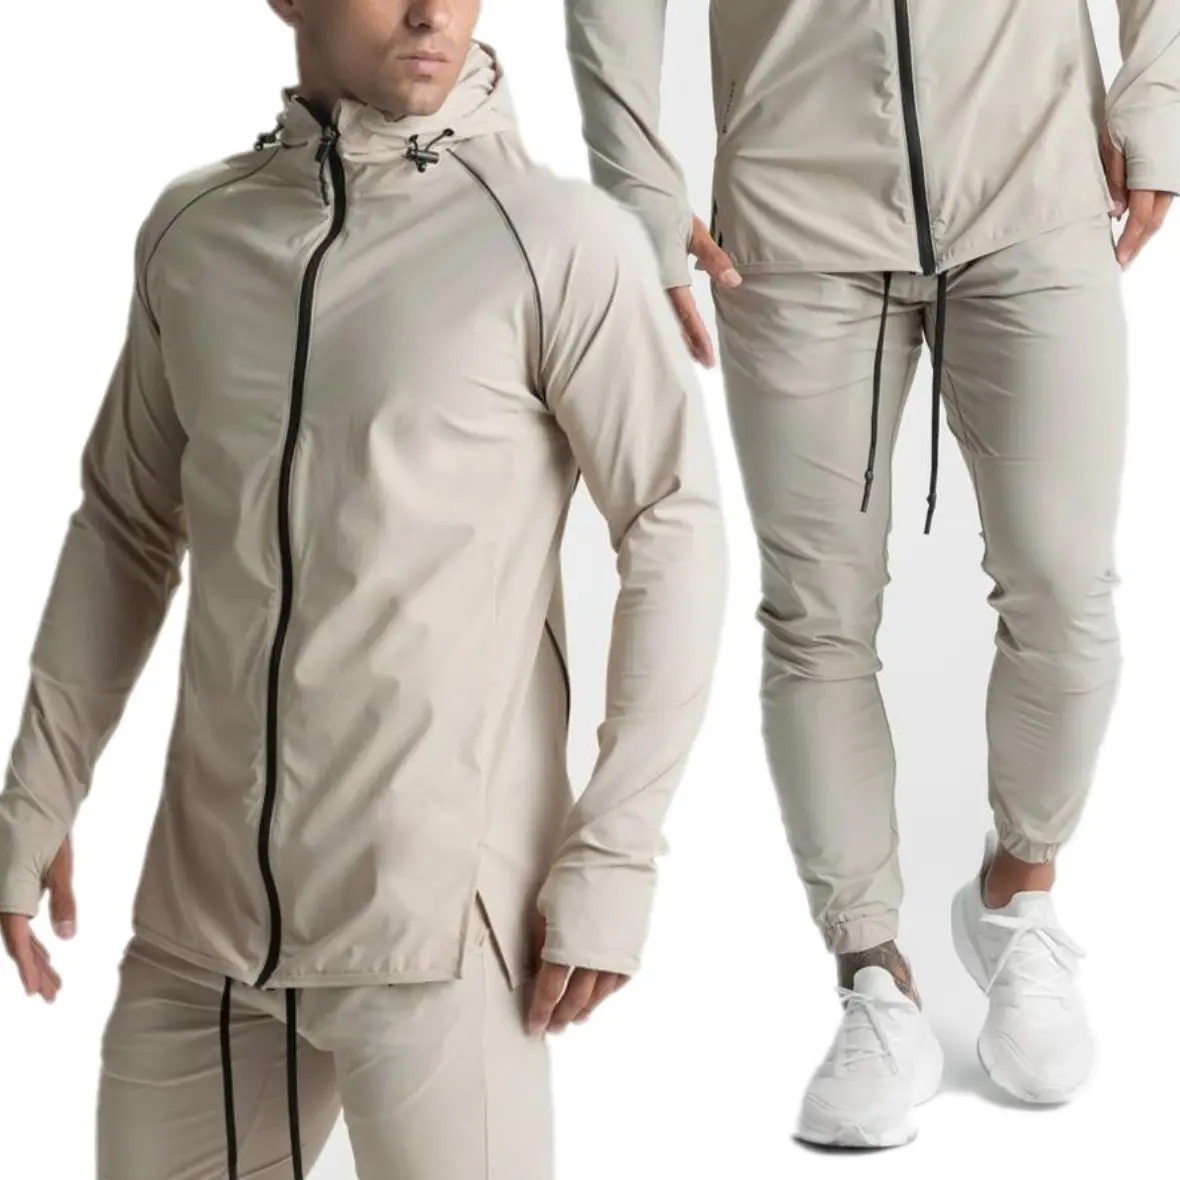 Men's Casual Tracksuits Long Sleeve Jogging Suits Sweatsuit Sets Track Jackets and Pants 2 Piece Outfit